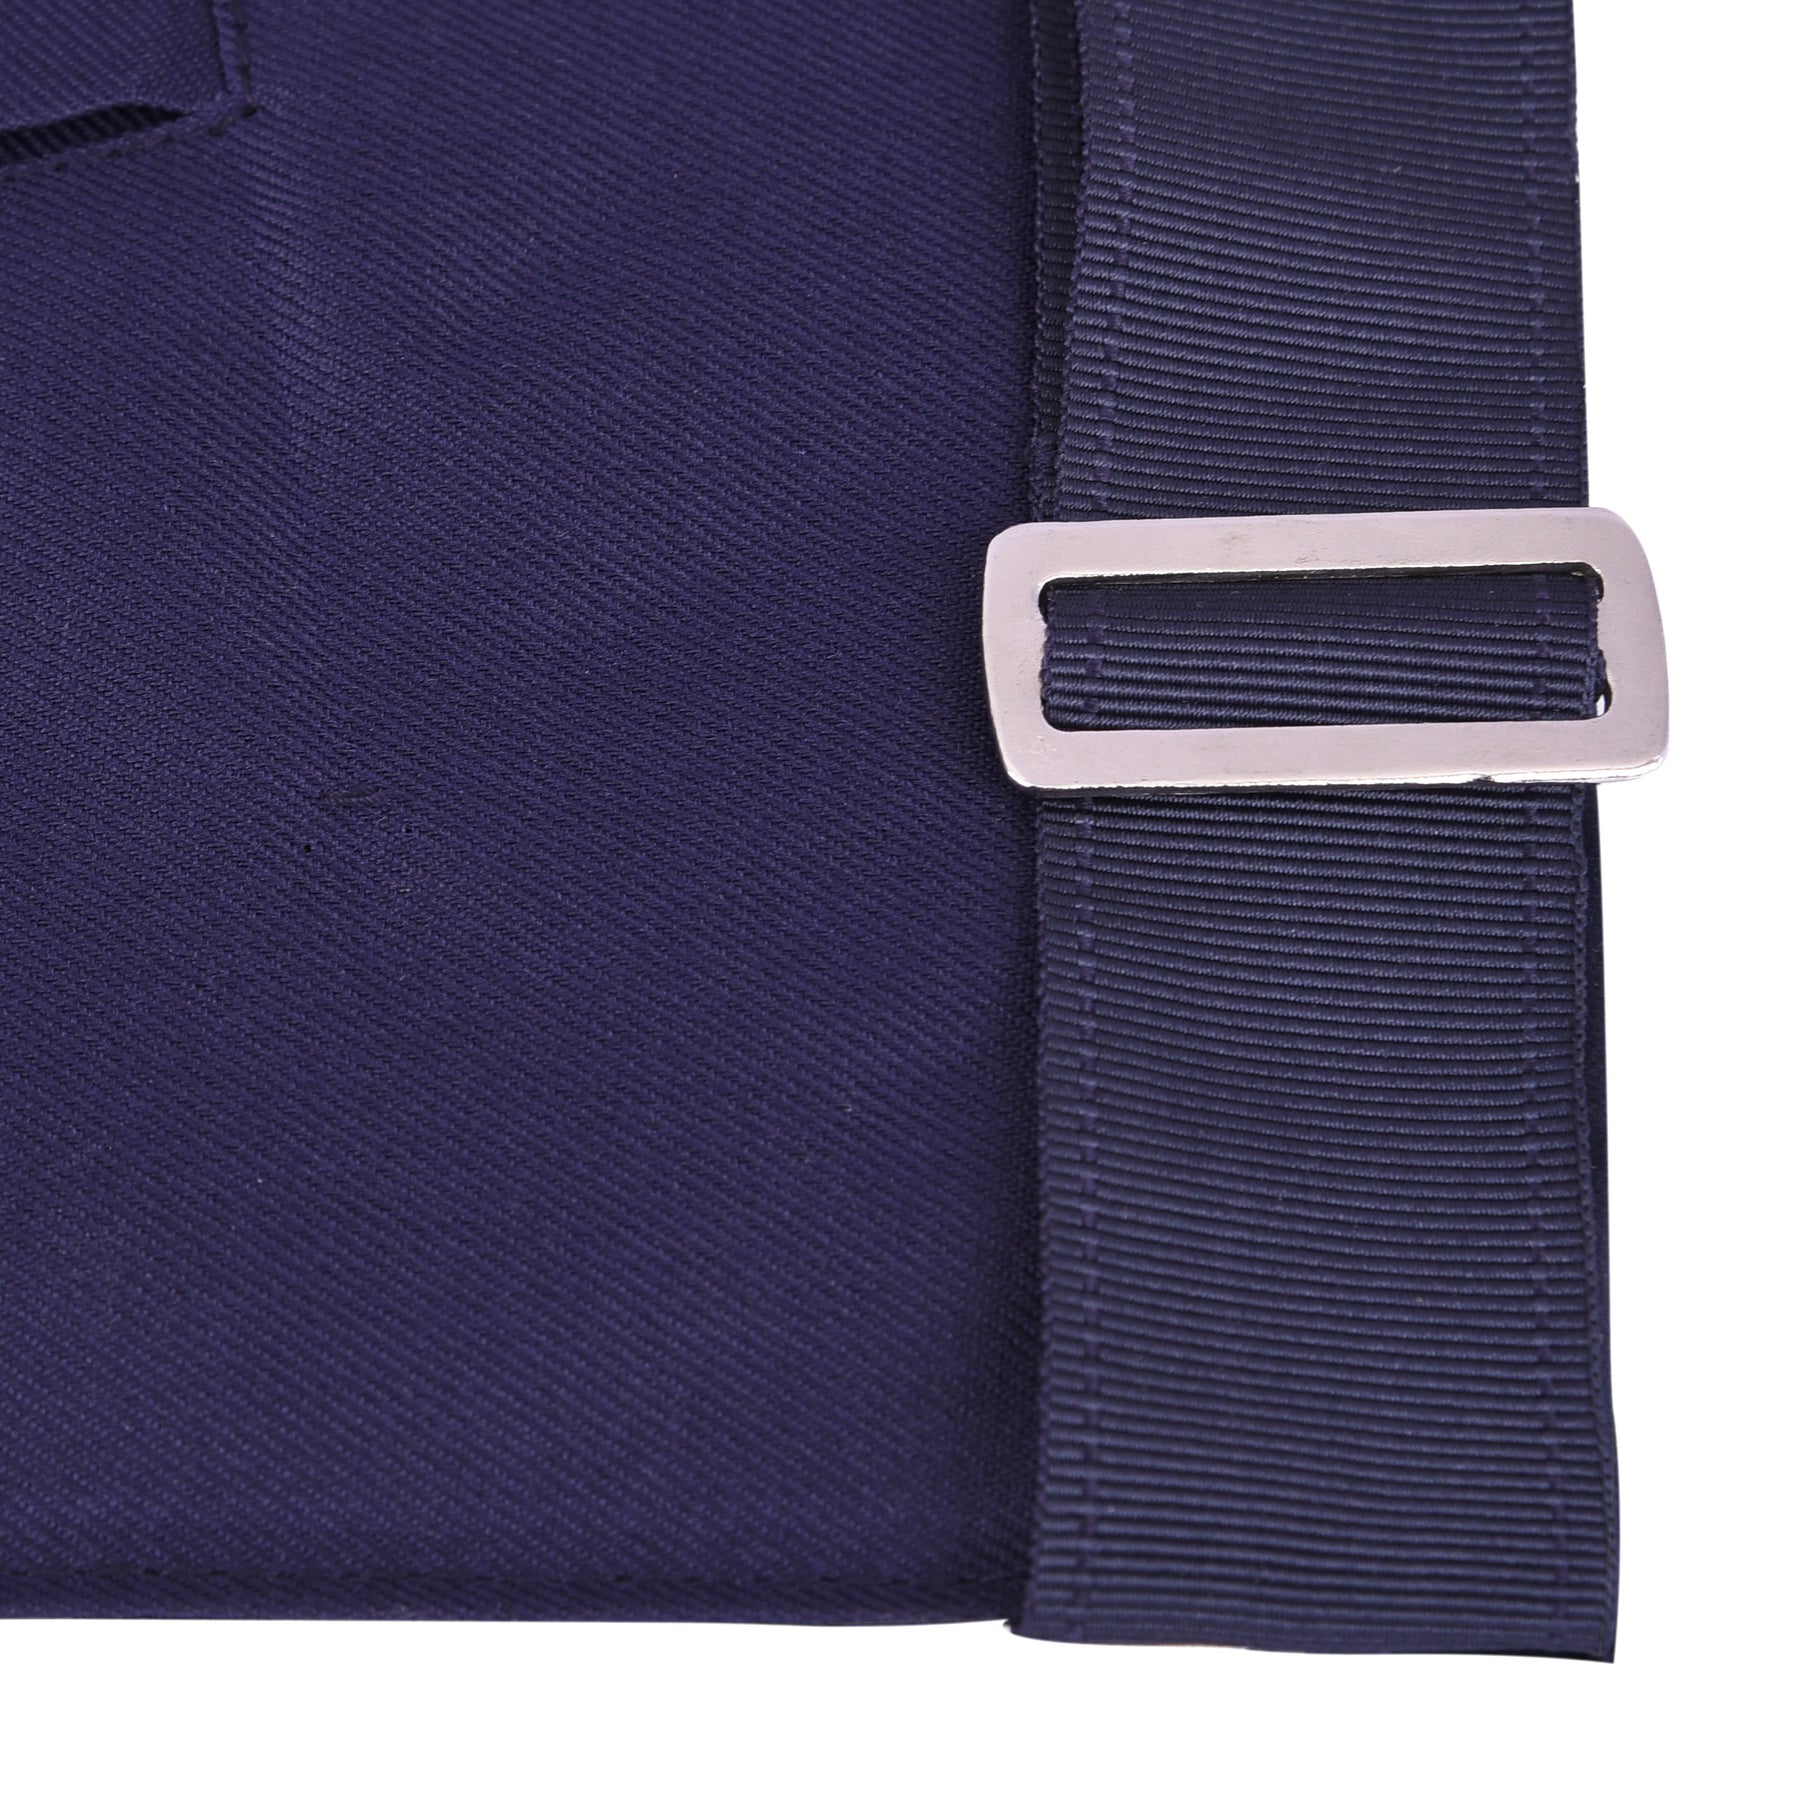 Junior Steward Blue Lodge Officer Apron - Navy Velvet With Silver Embroidery Thread